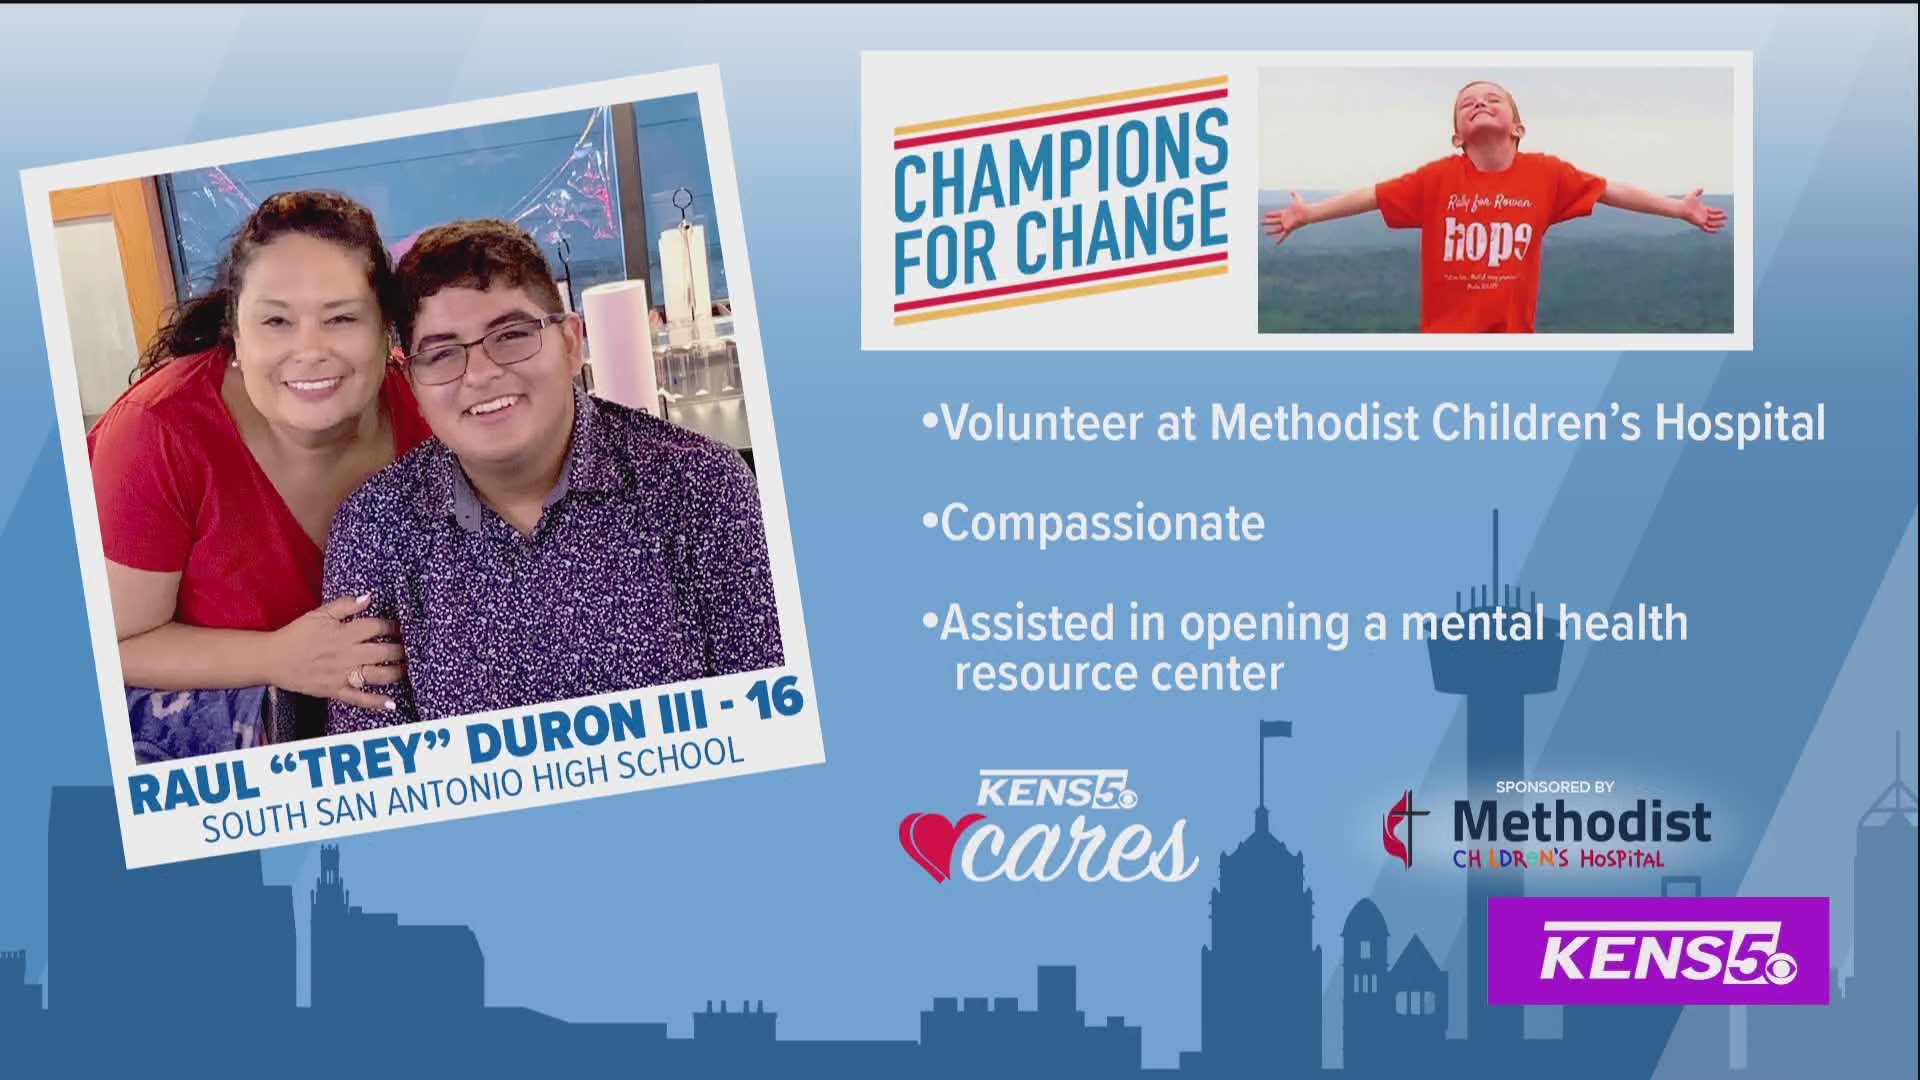 We are introducing you to our "Champion for Change" Raul "Trey" Duron, III. He has worked to improve mental health programs for students.